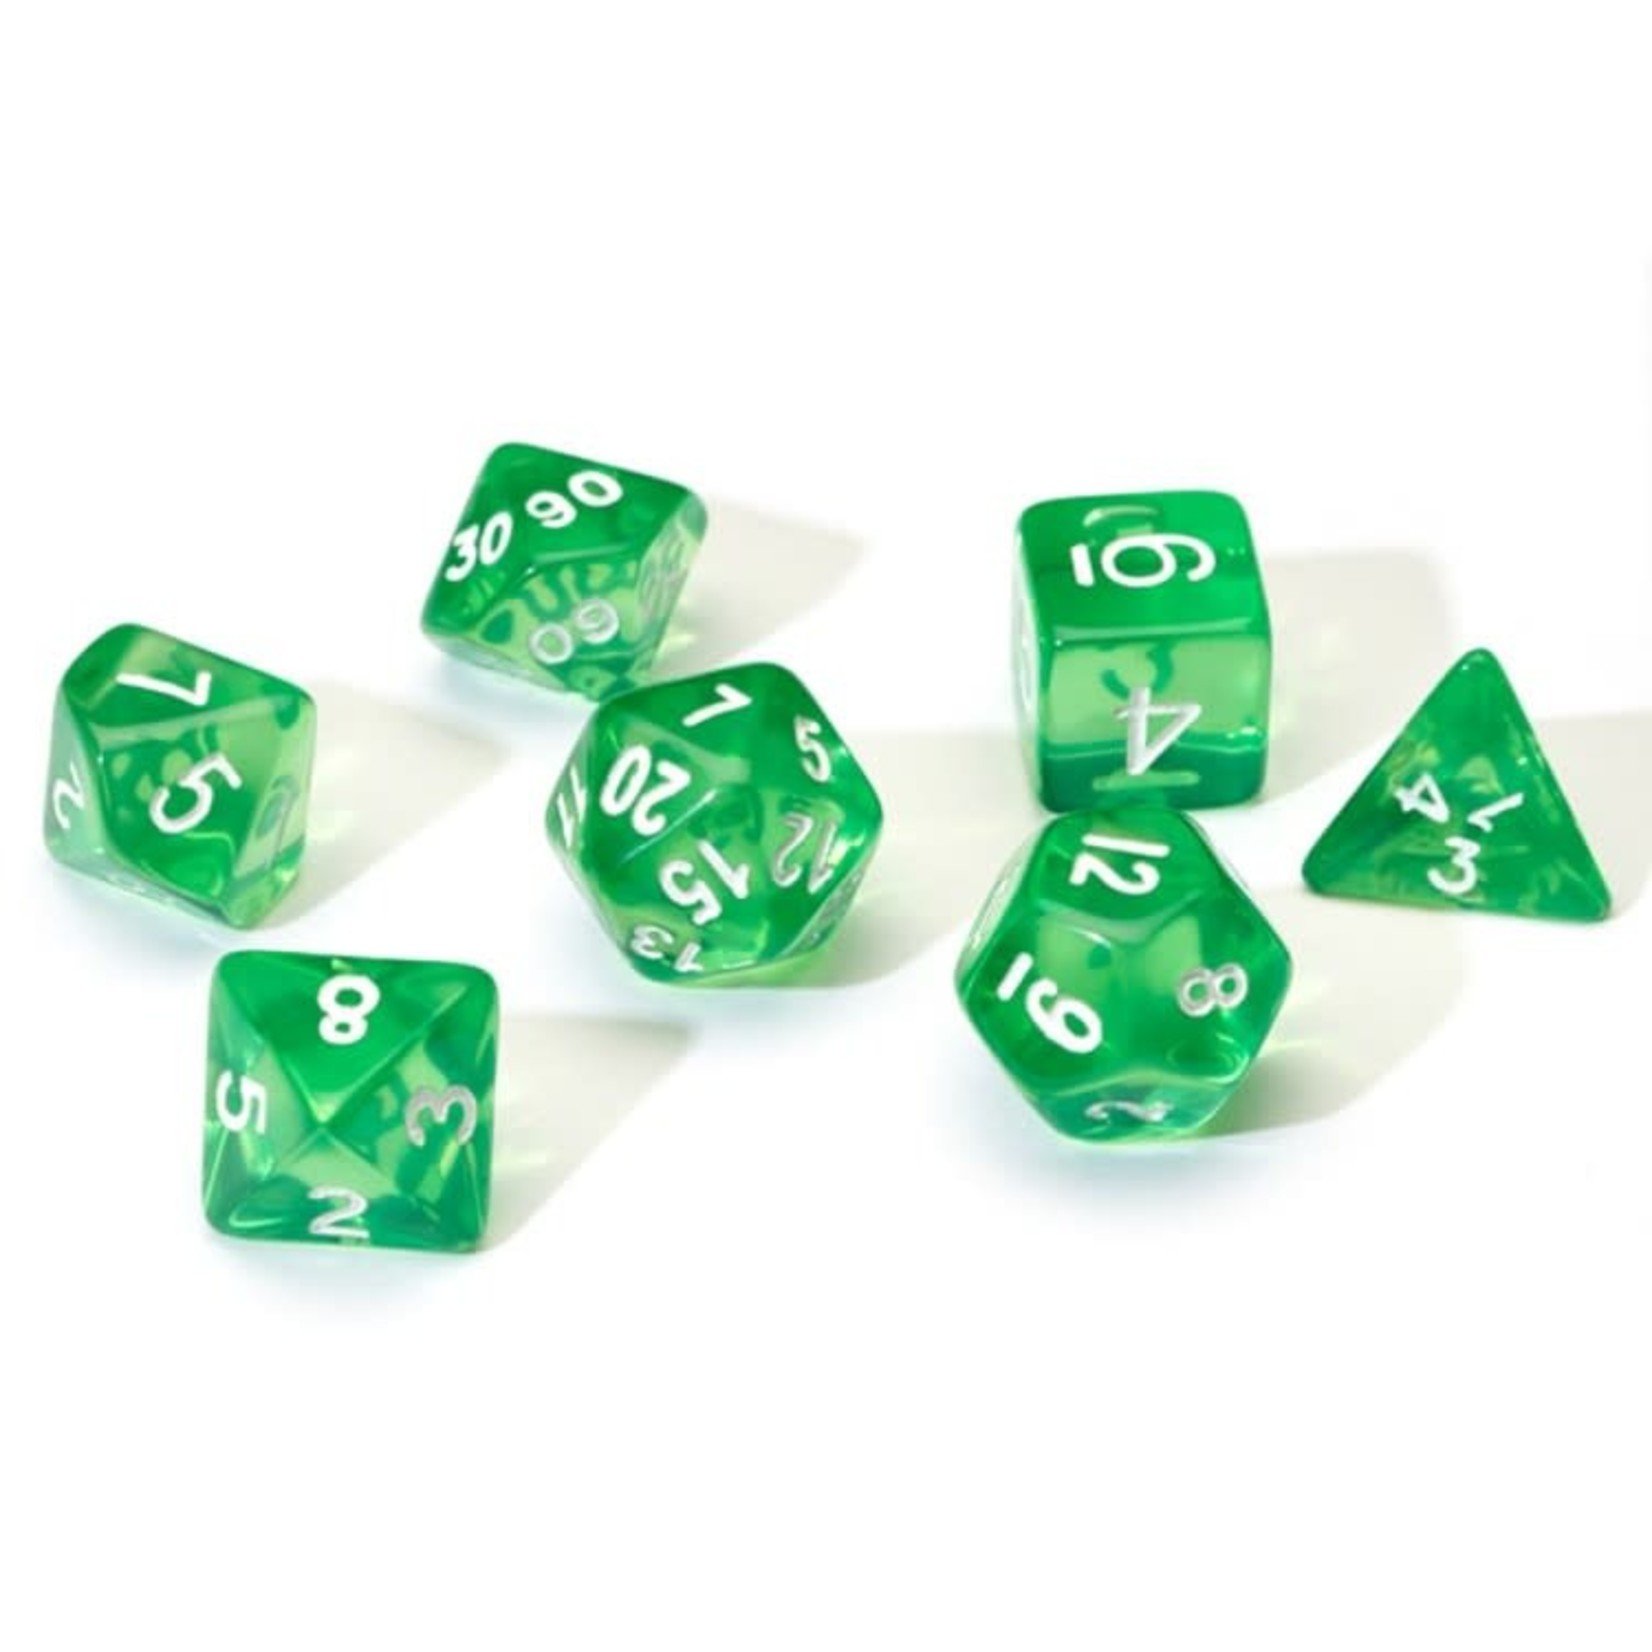 Sirius RPG Dice Translucent Green with White Polyhedral 8 die set